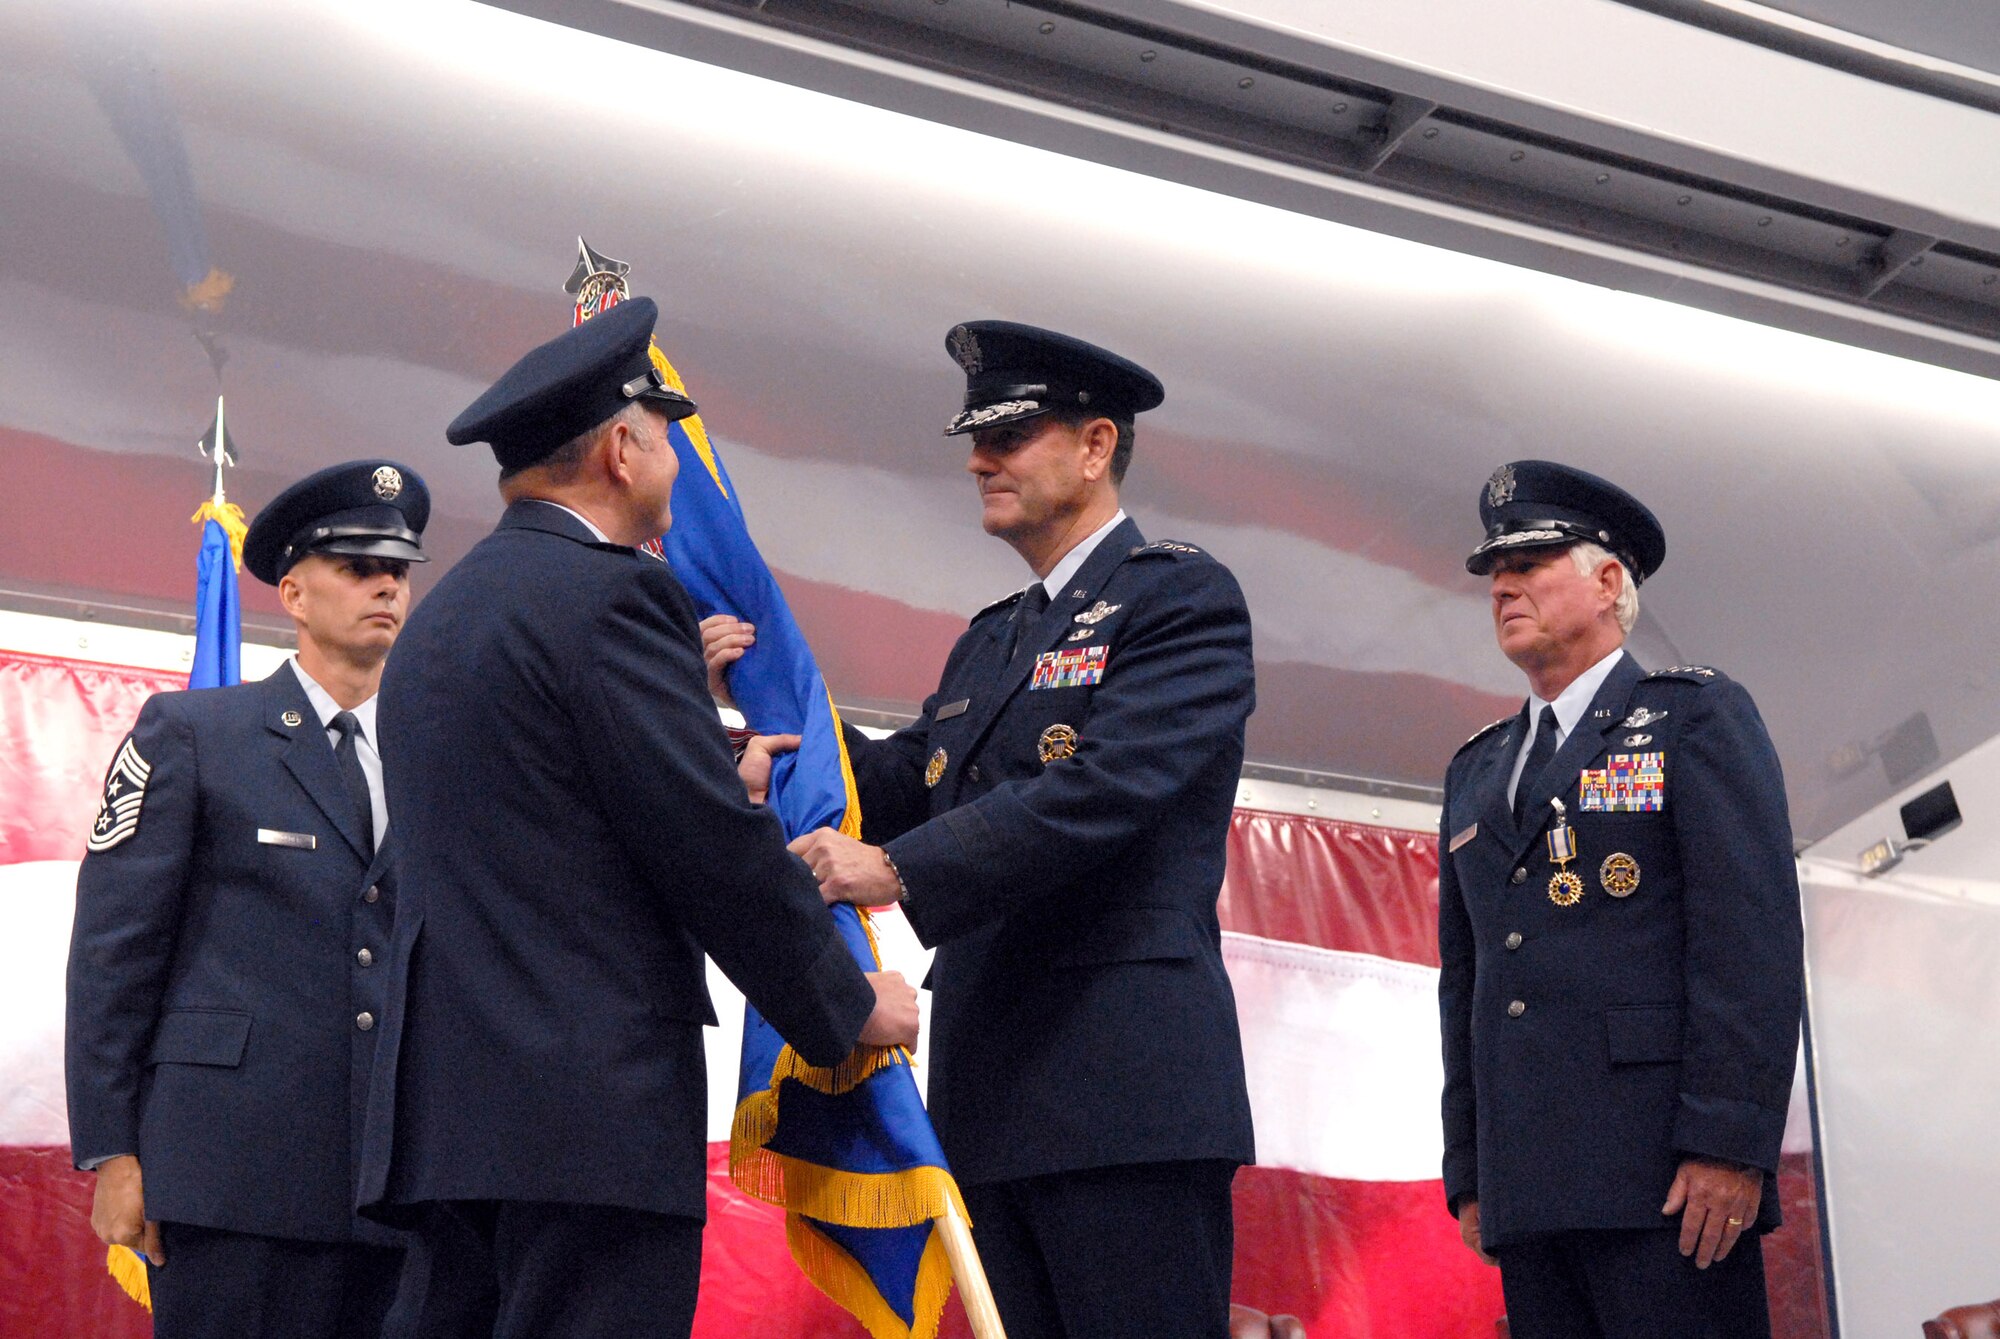 Gen. Stephen R. Lorenz assumes command of Air Education and Training Command July 2 at Randolph Air Force Base, Texas. He replaced Gen. William R. Looney III, who retired during the ceremony. Air Force Vice Chief of Staff Gen. Duncan J. McNabb presided at the ceremony. (U.S. Air Force photo/Rich McFadden) 

